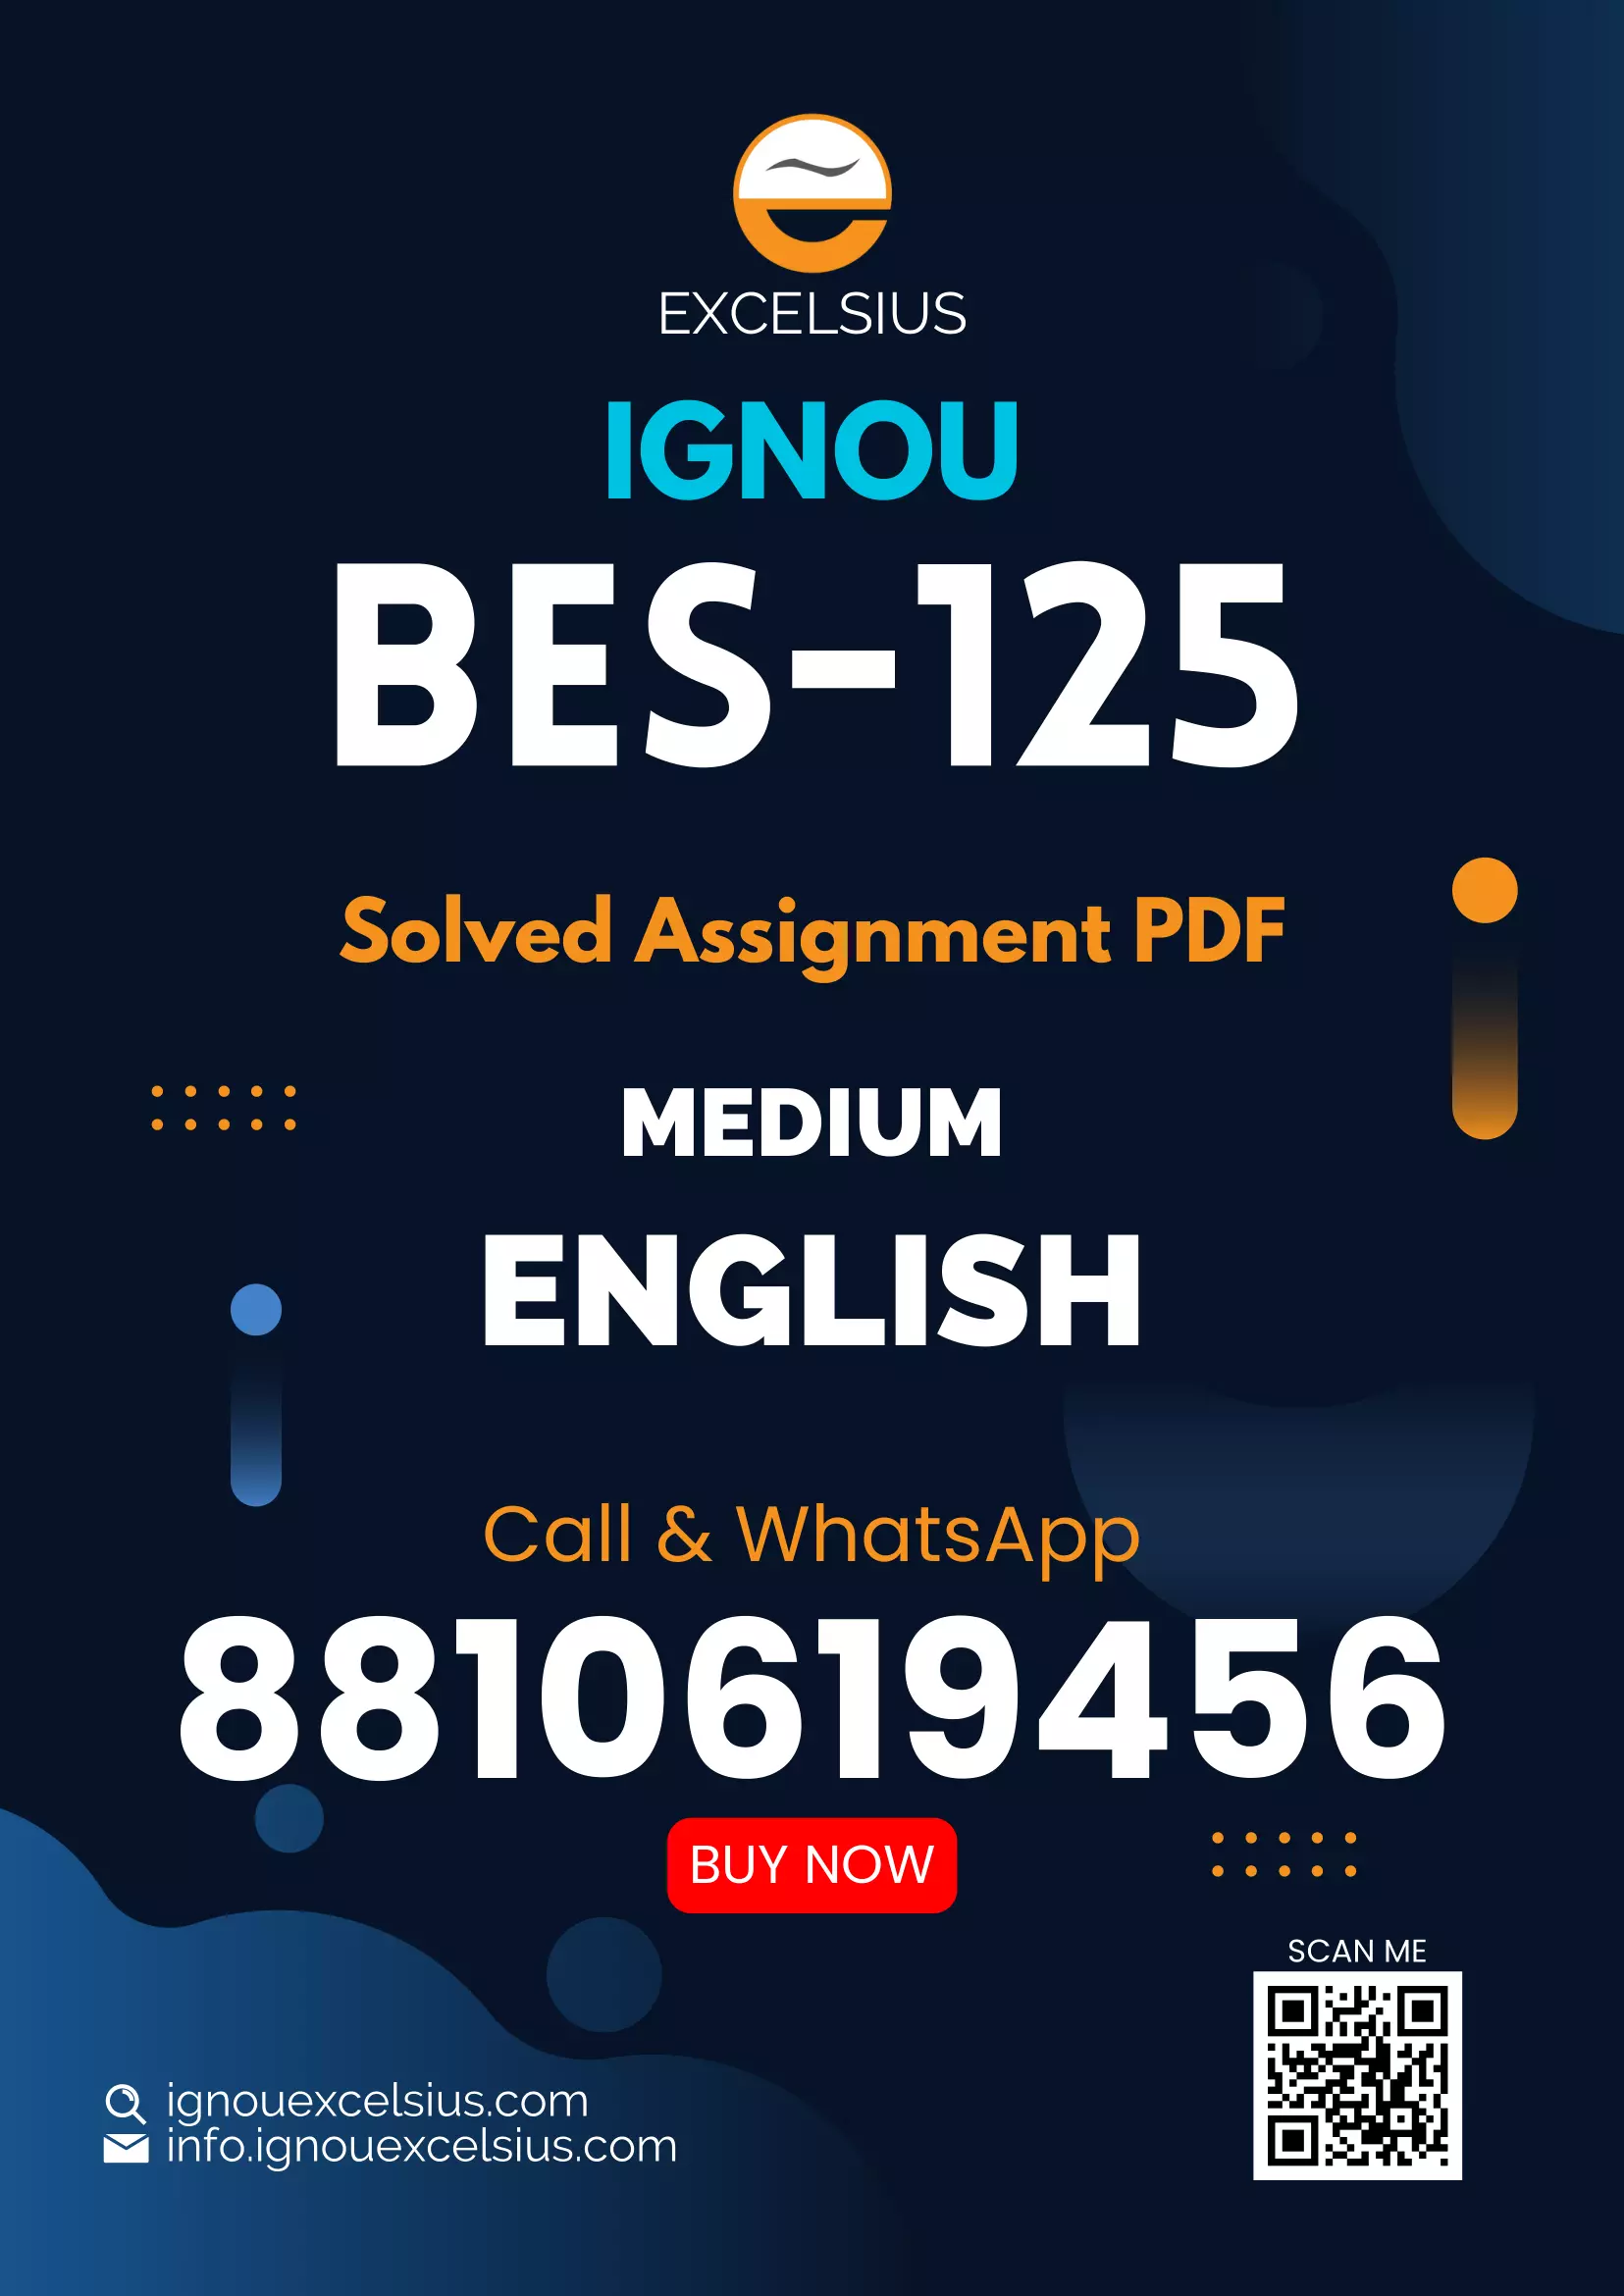 IGNOU BES-125 - Understanding Disciplines and Subjects, Latest Solved Assignment-January 2021 - July 2021